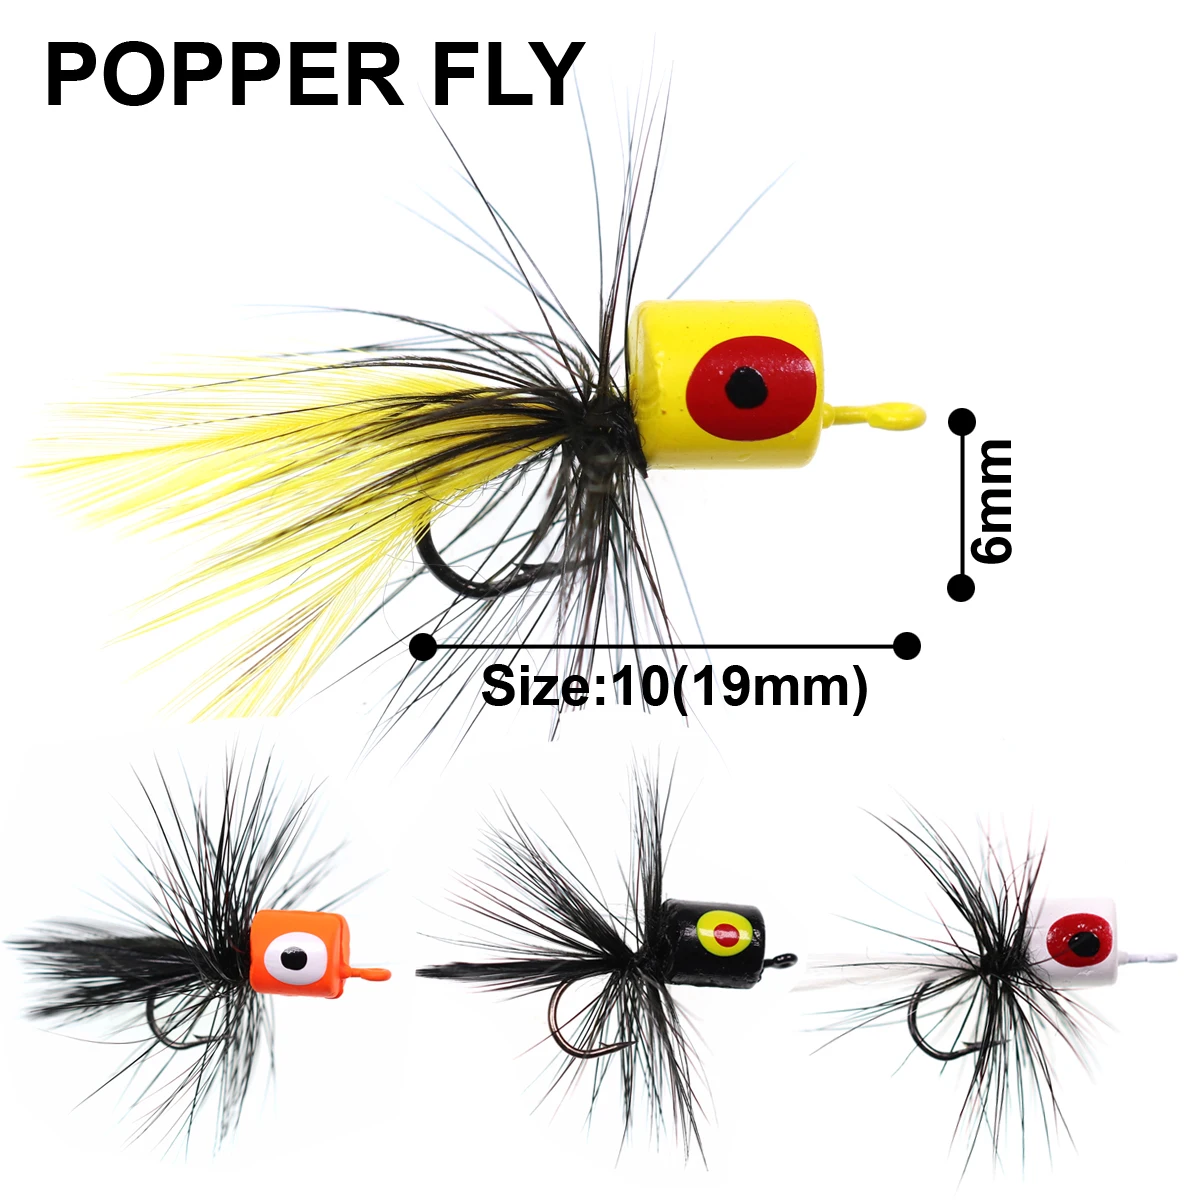 BASS FOAM POPPERS 15 COLORS FLY FISHING TROUT BLUEGILL PANFISH SIZE 6 HOOKS 